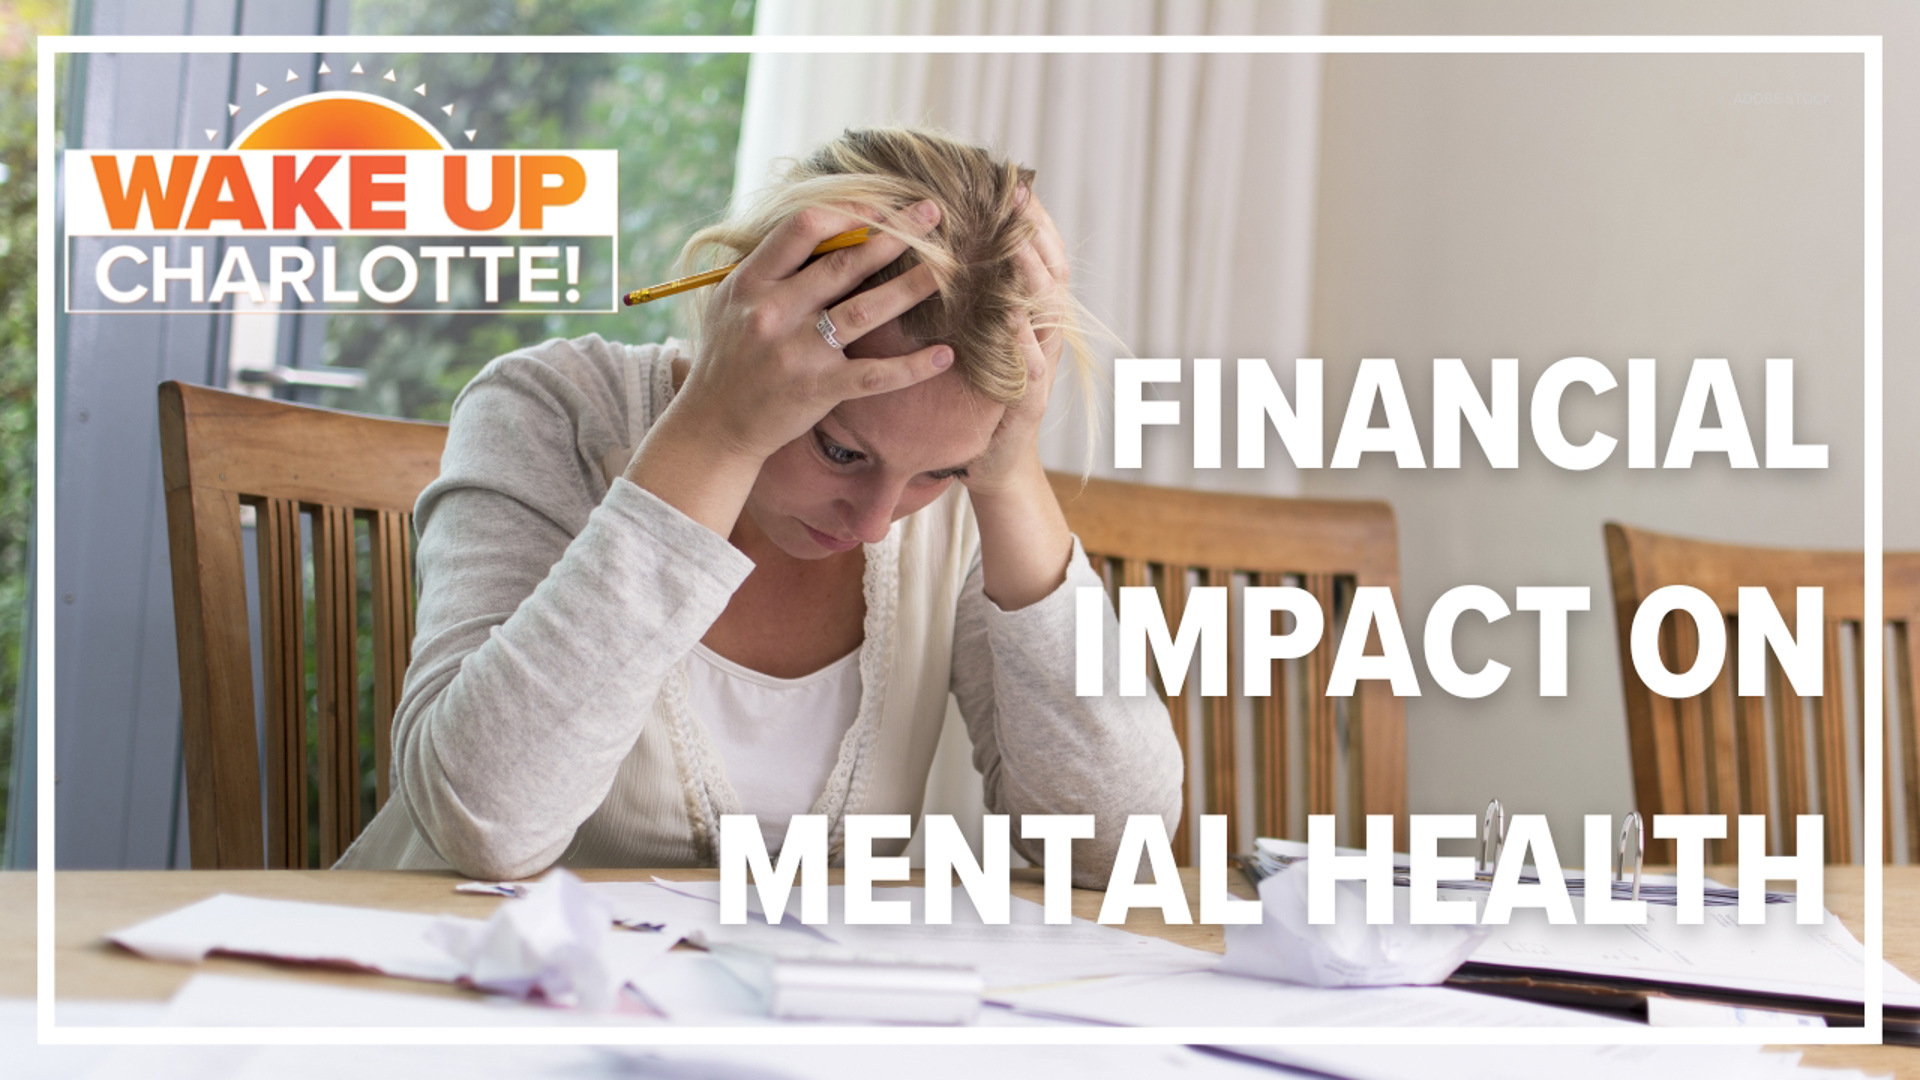 New data shows just how much our finances impact our mental health.